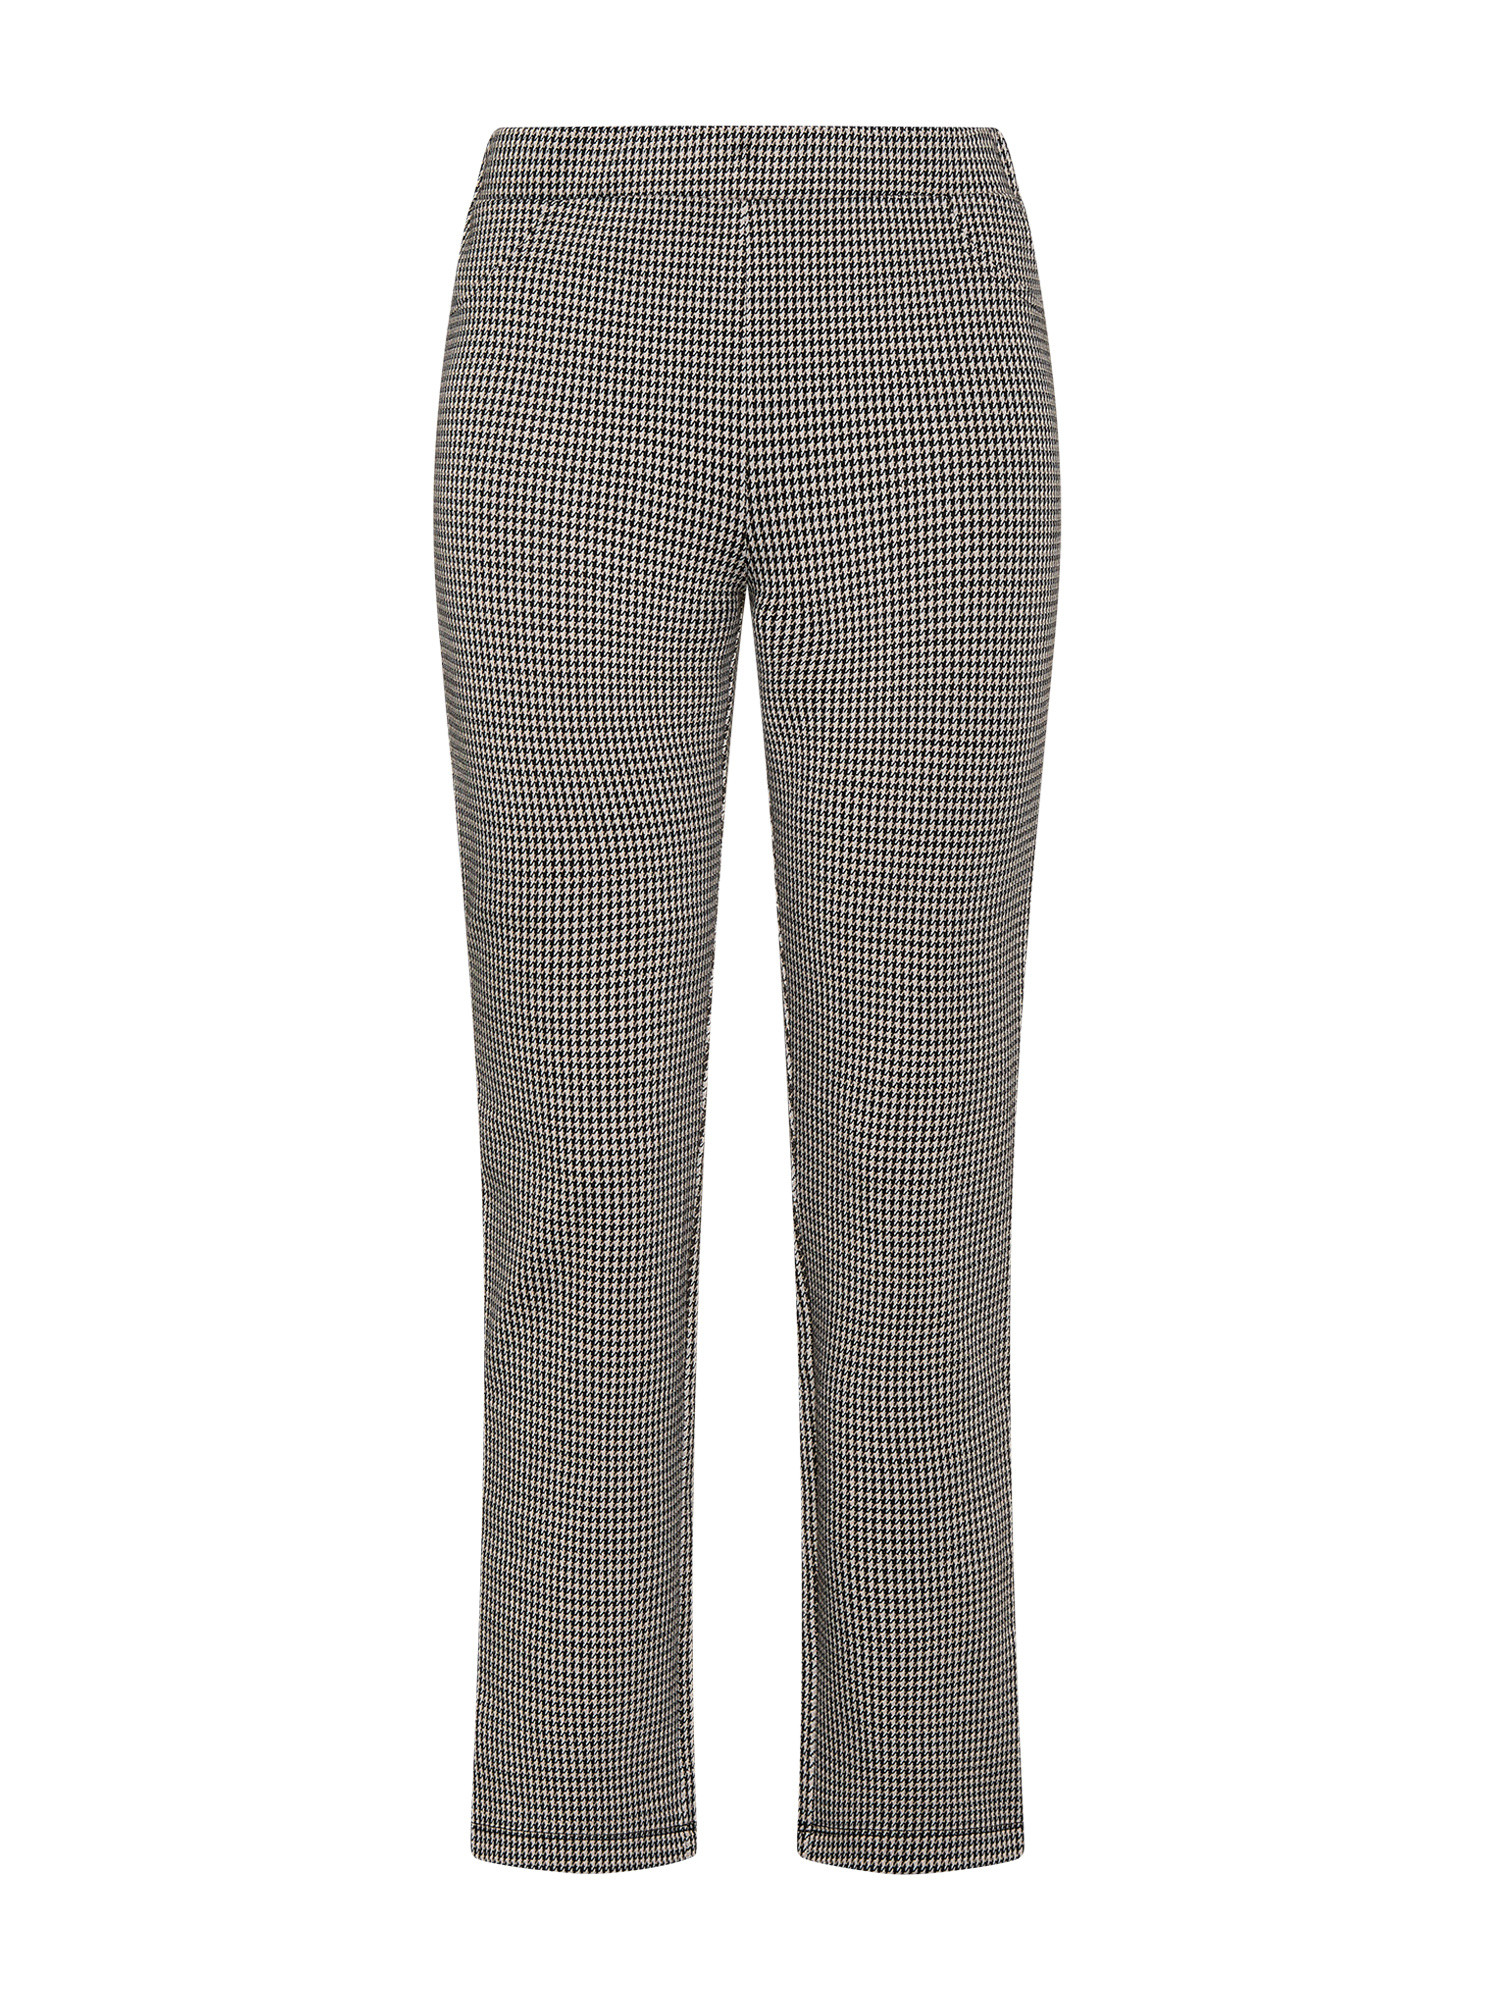 Koan - Regular fit micro houndstooth trousers, Black, large image number 0